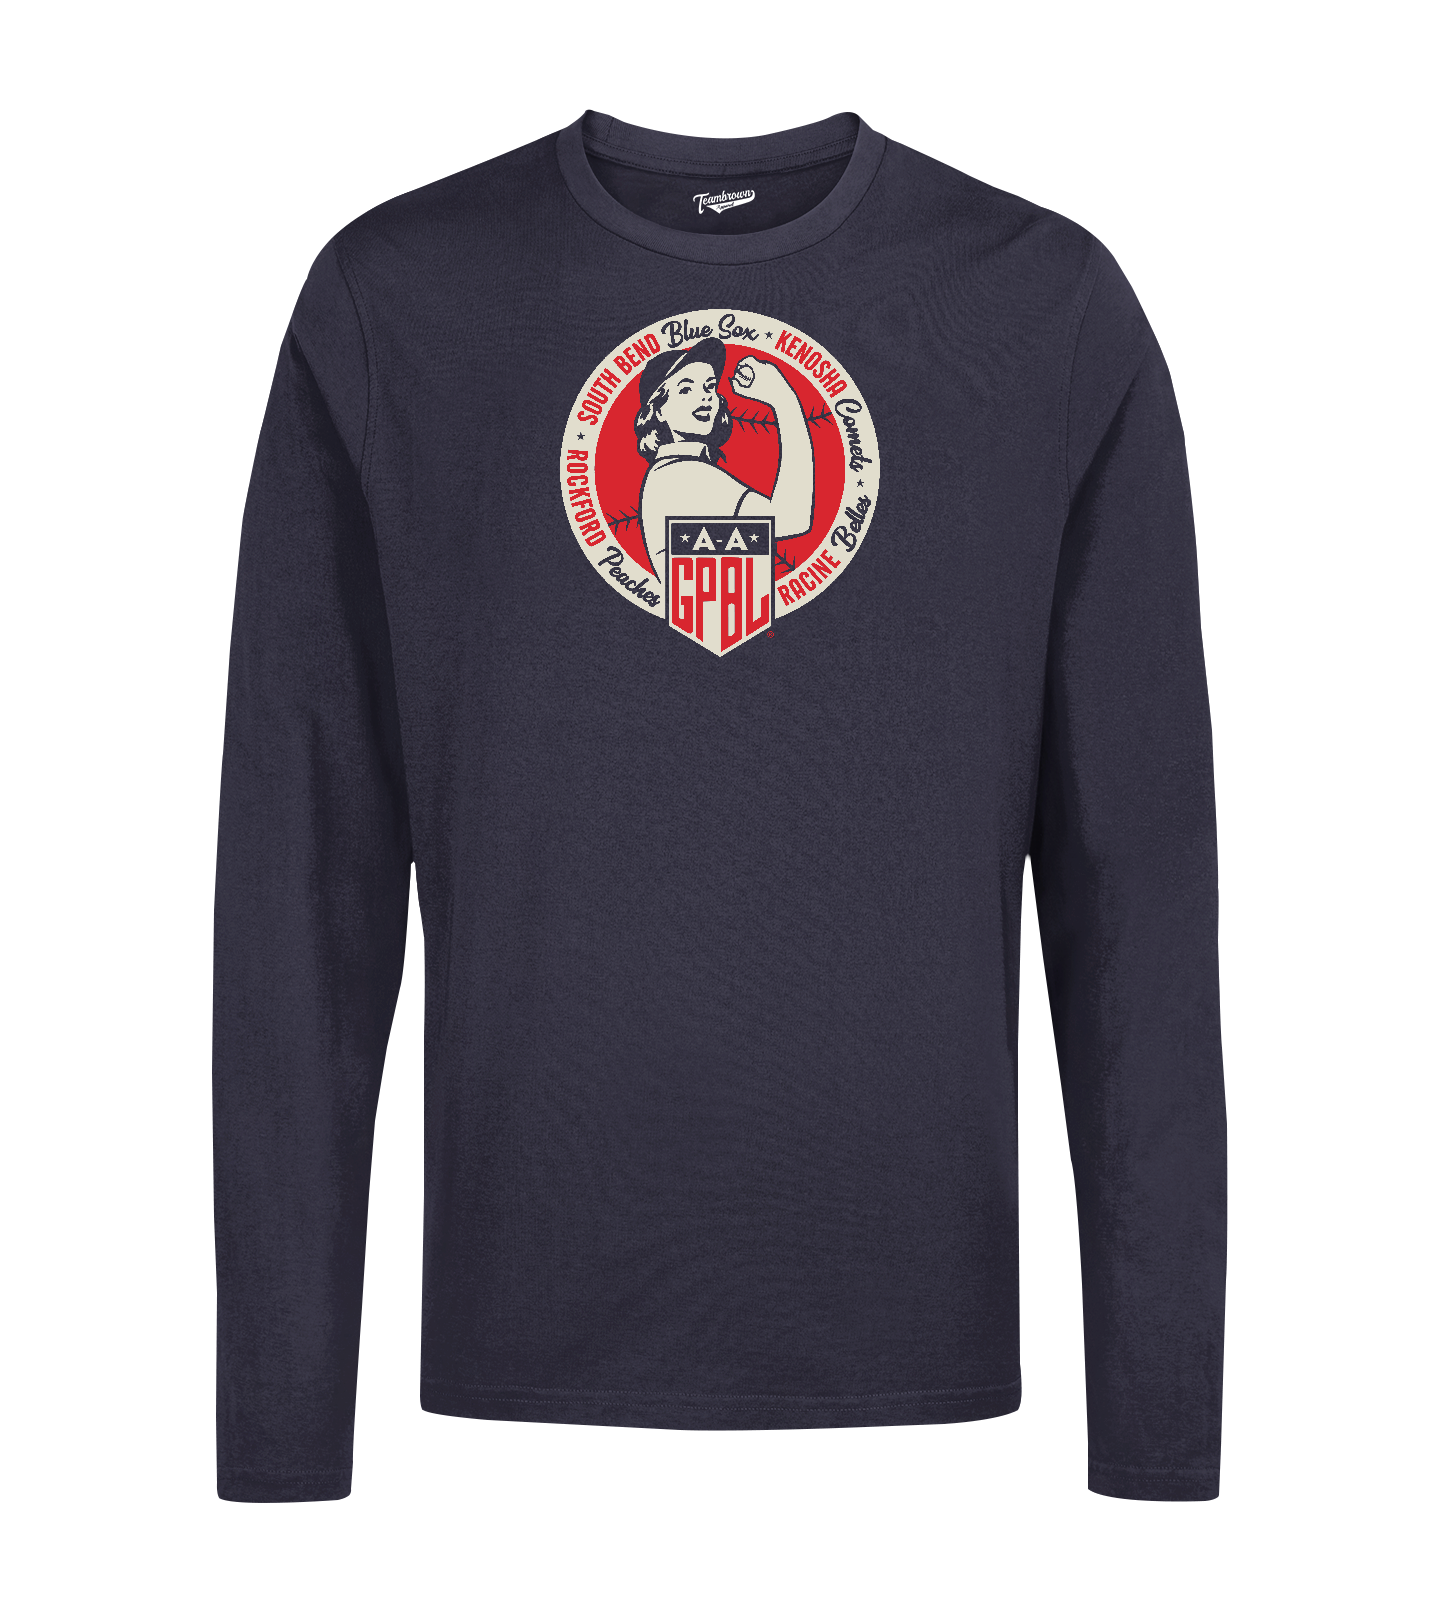 Diamond - Original Four - Unisex Long Sleeve Crew T-Shirt | Officially Licensed - AAGPBL